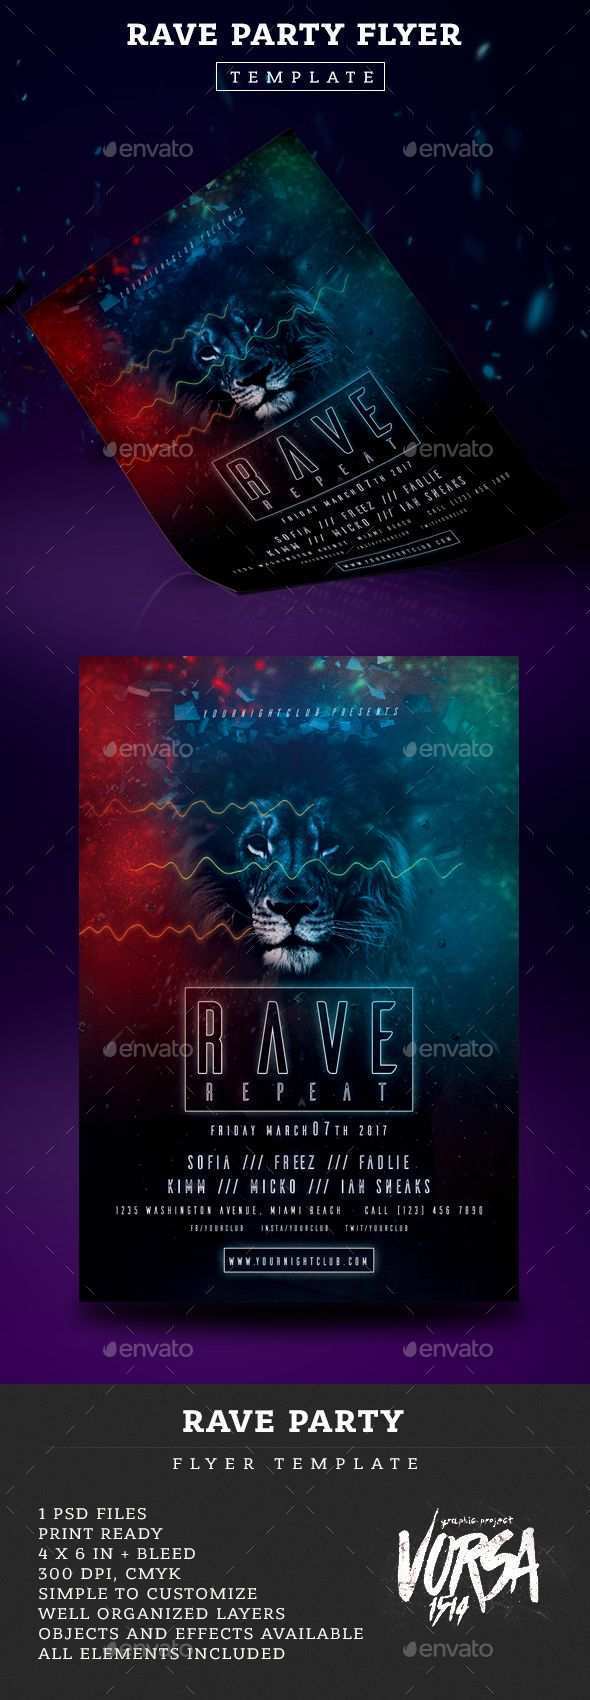 81 Adding Rave Flyer Templates in Photoshop with Rave Flyer Templates